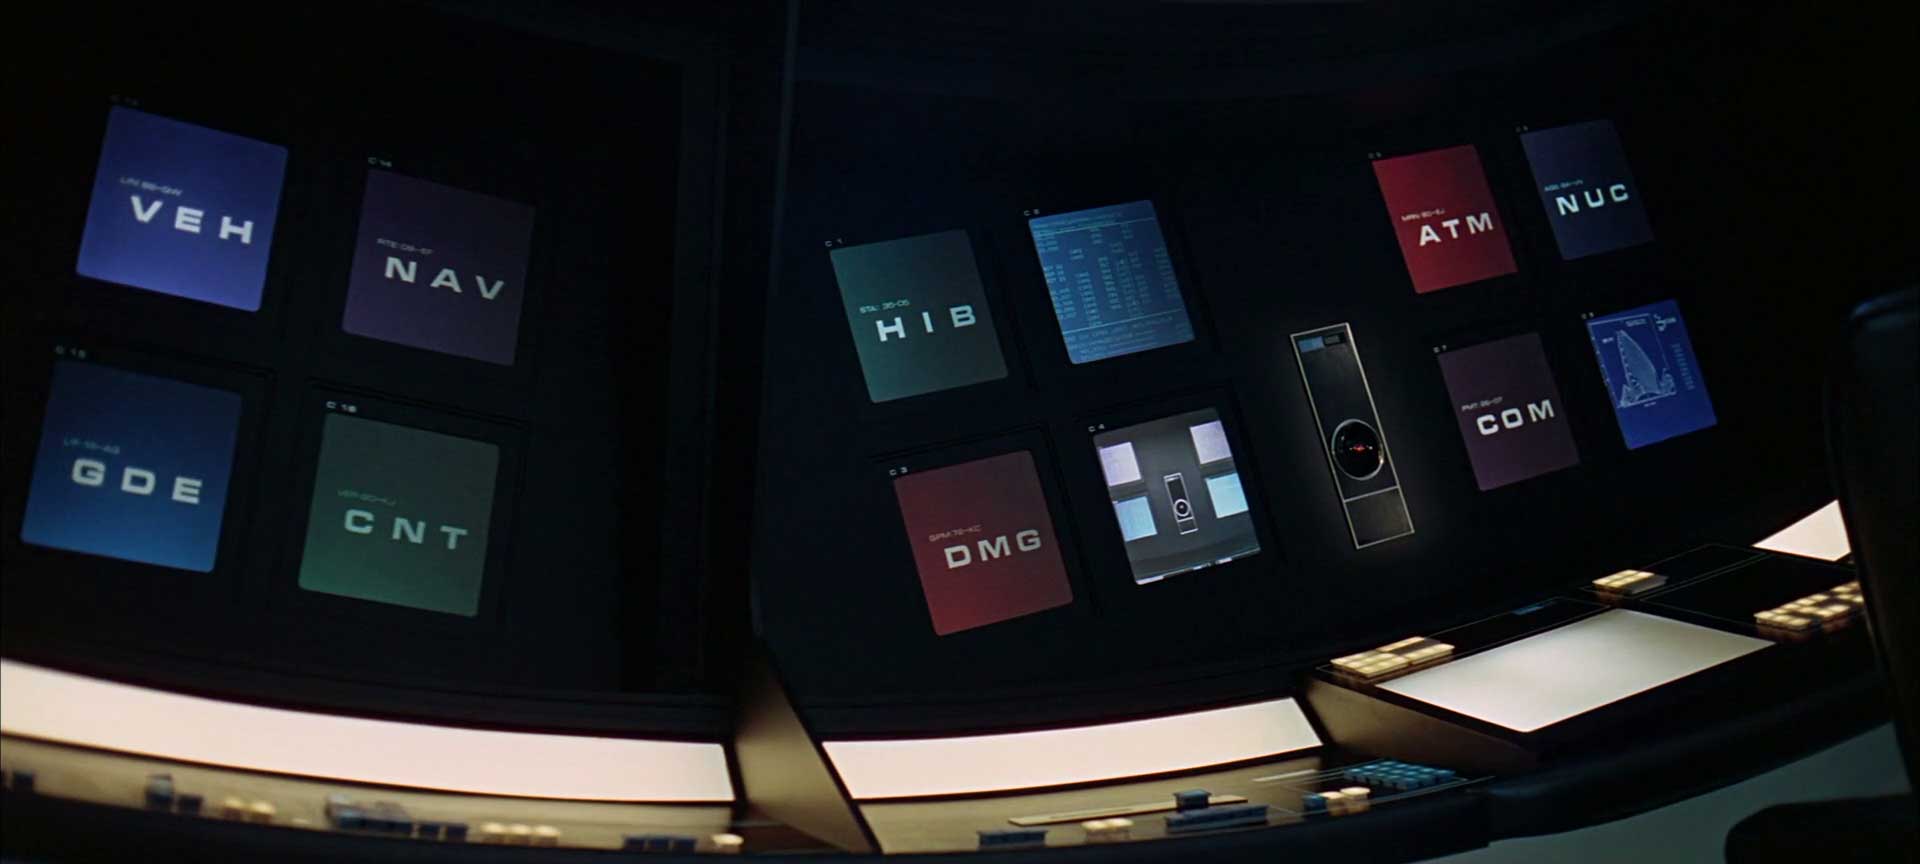 Display graphics in 2001: A Space Odyssey.